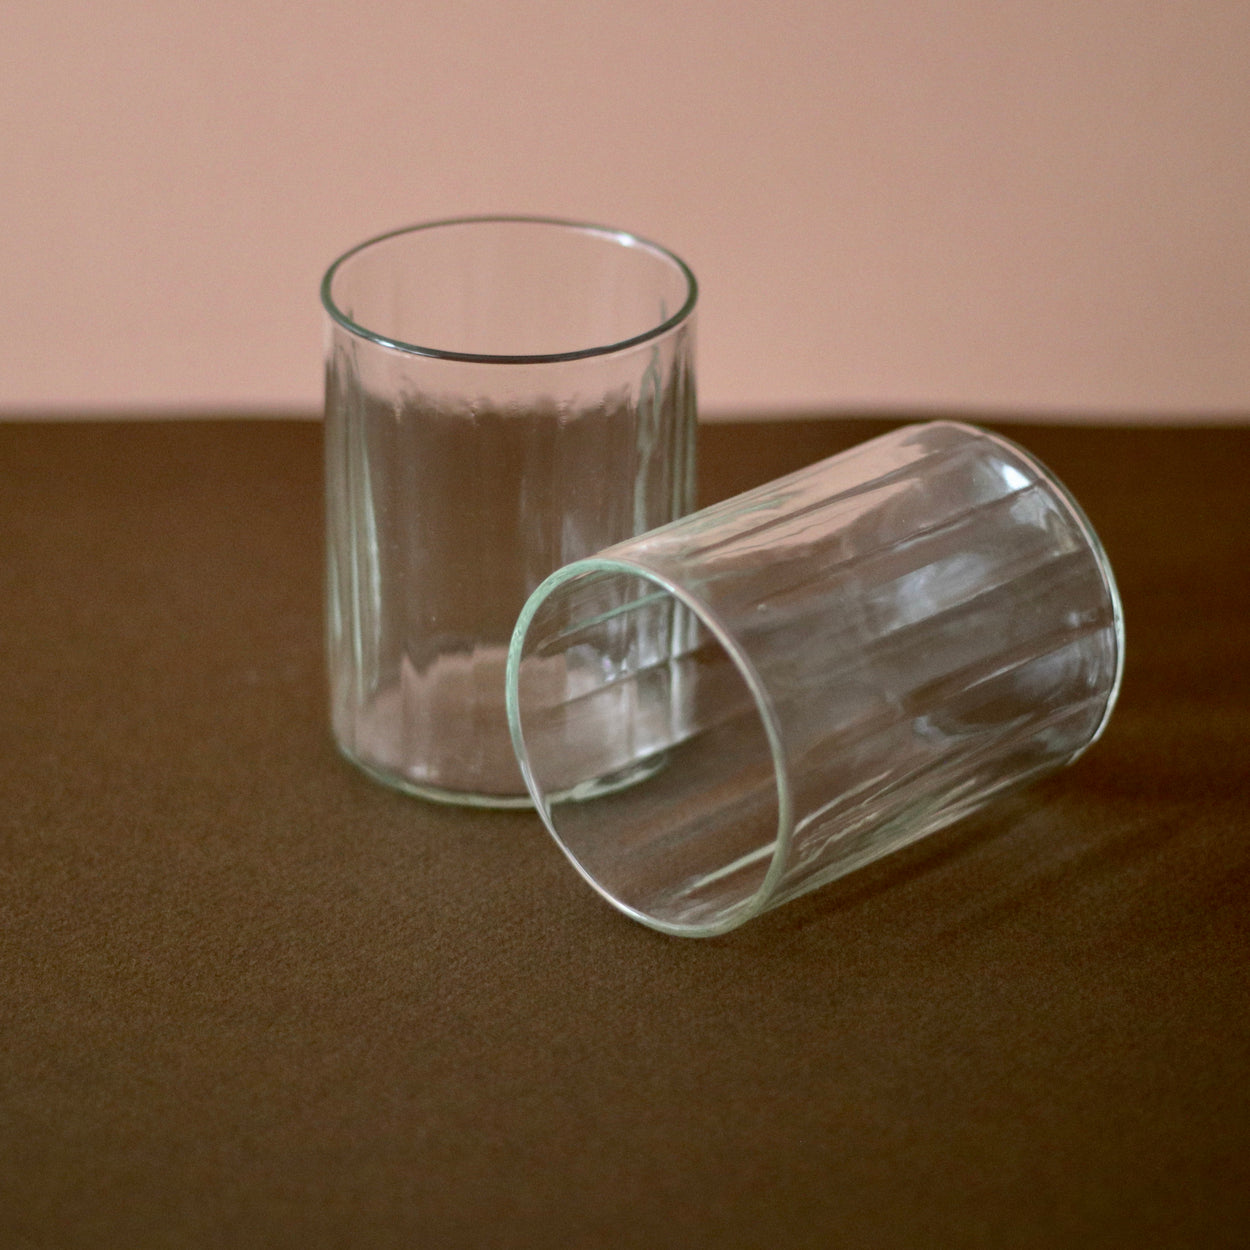 Hand crafted recycled glass tumblers x 2, one on its side, against a pink and brown background.